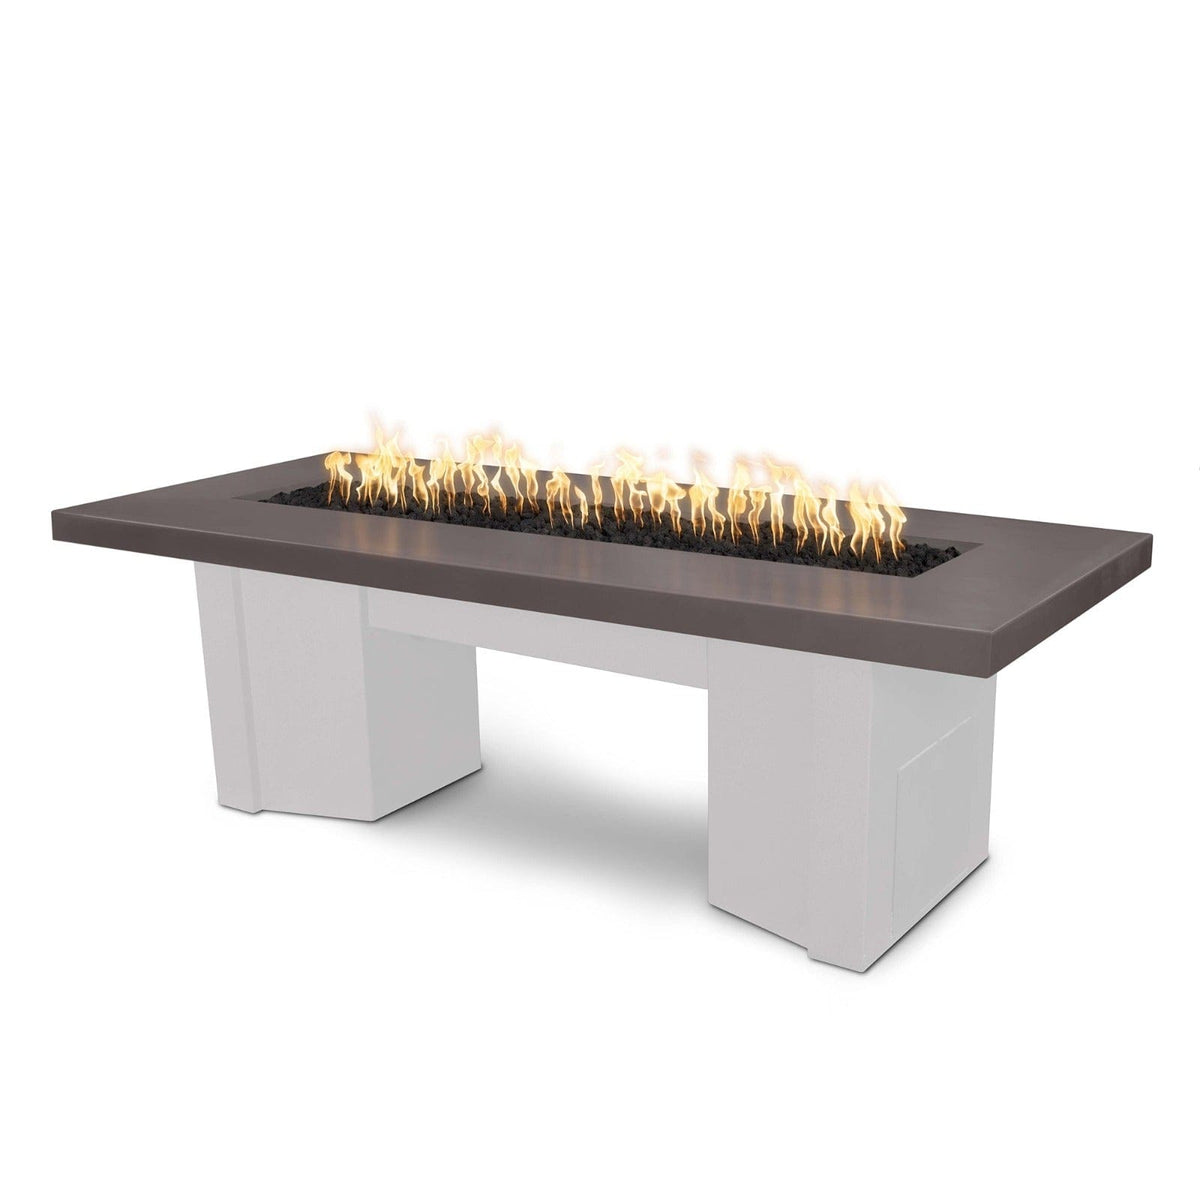 The Outdoor Plus Fire Features Chestnut (-CST) / White Powder Coated Steel (-WHT) The Outdoor Plus 78&quot; Alameda Fire Table Smooth Concrete in Liquid Propane - 110V Plug &amp; Play Electronic Ignition / OPT-ALMGFRC78EKIT-LP